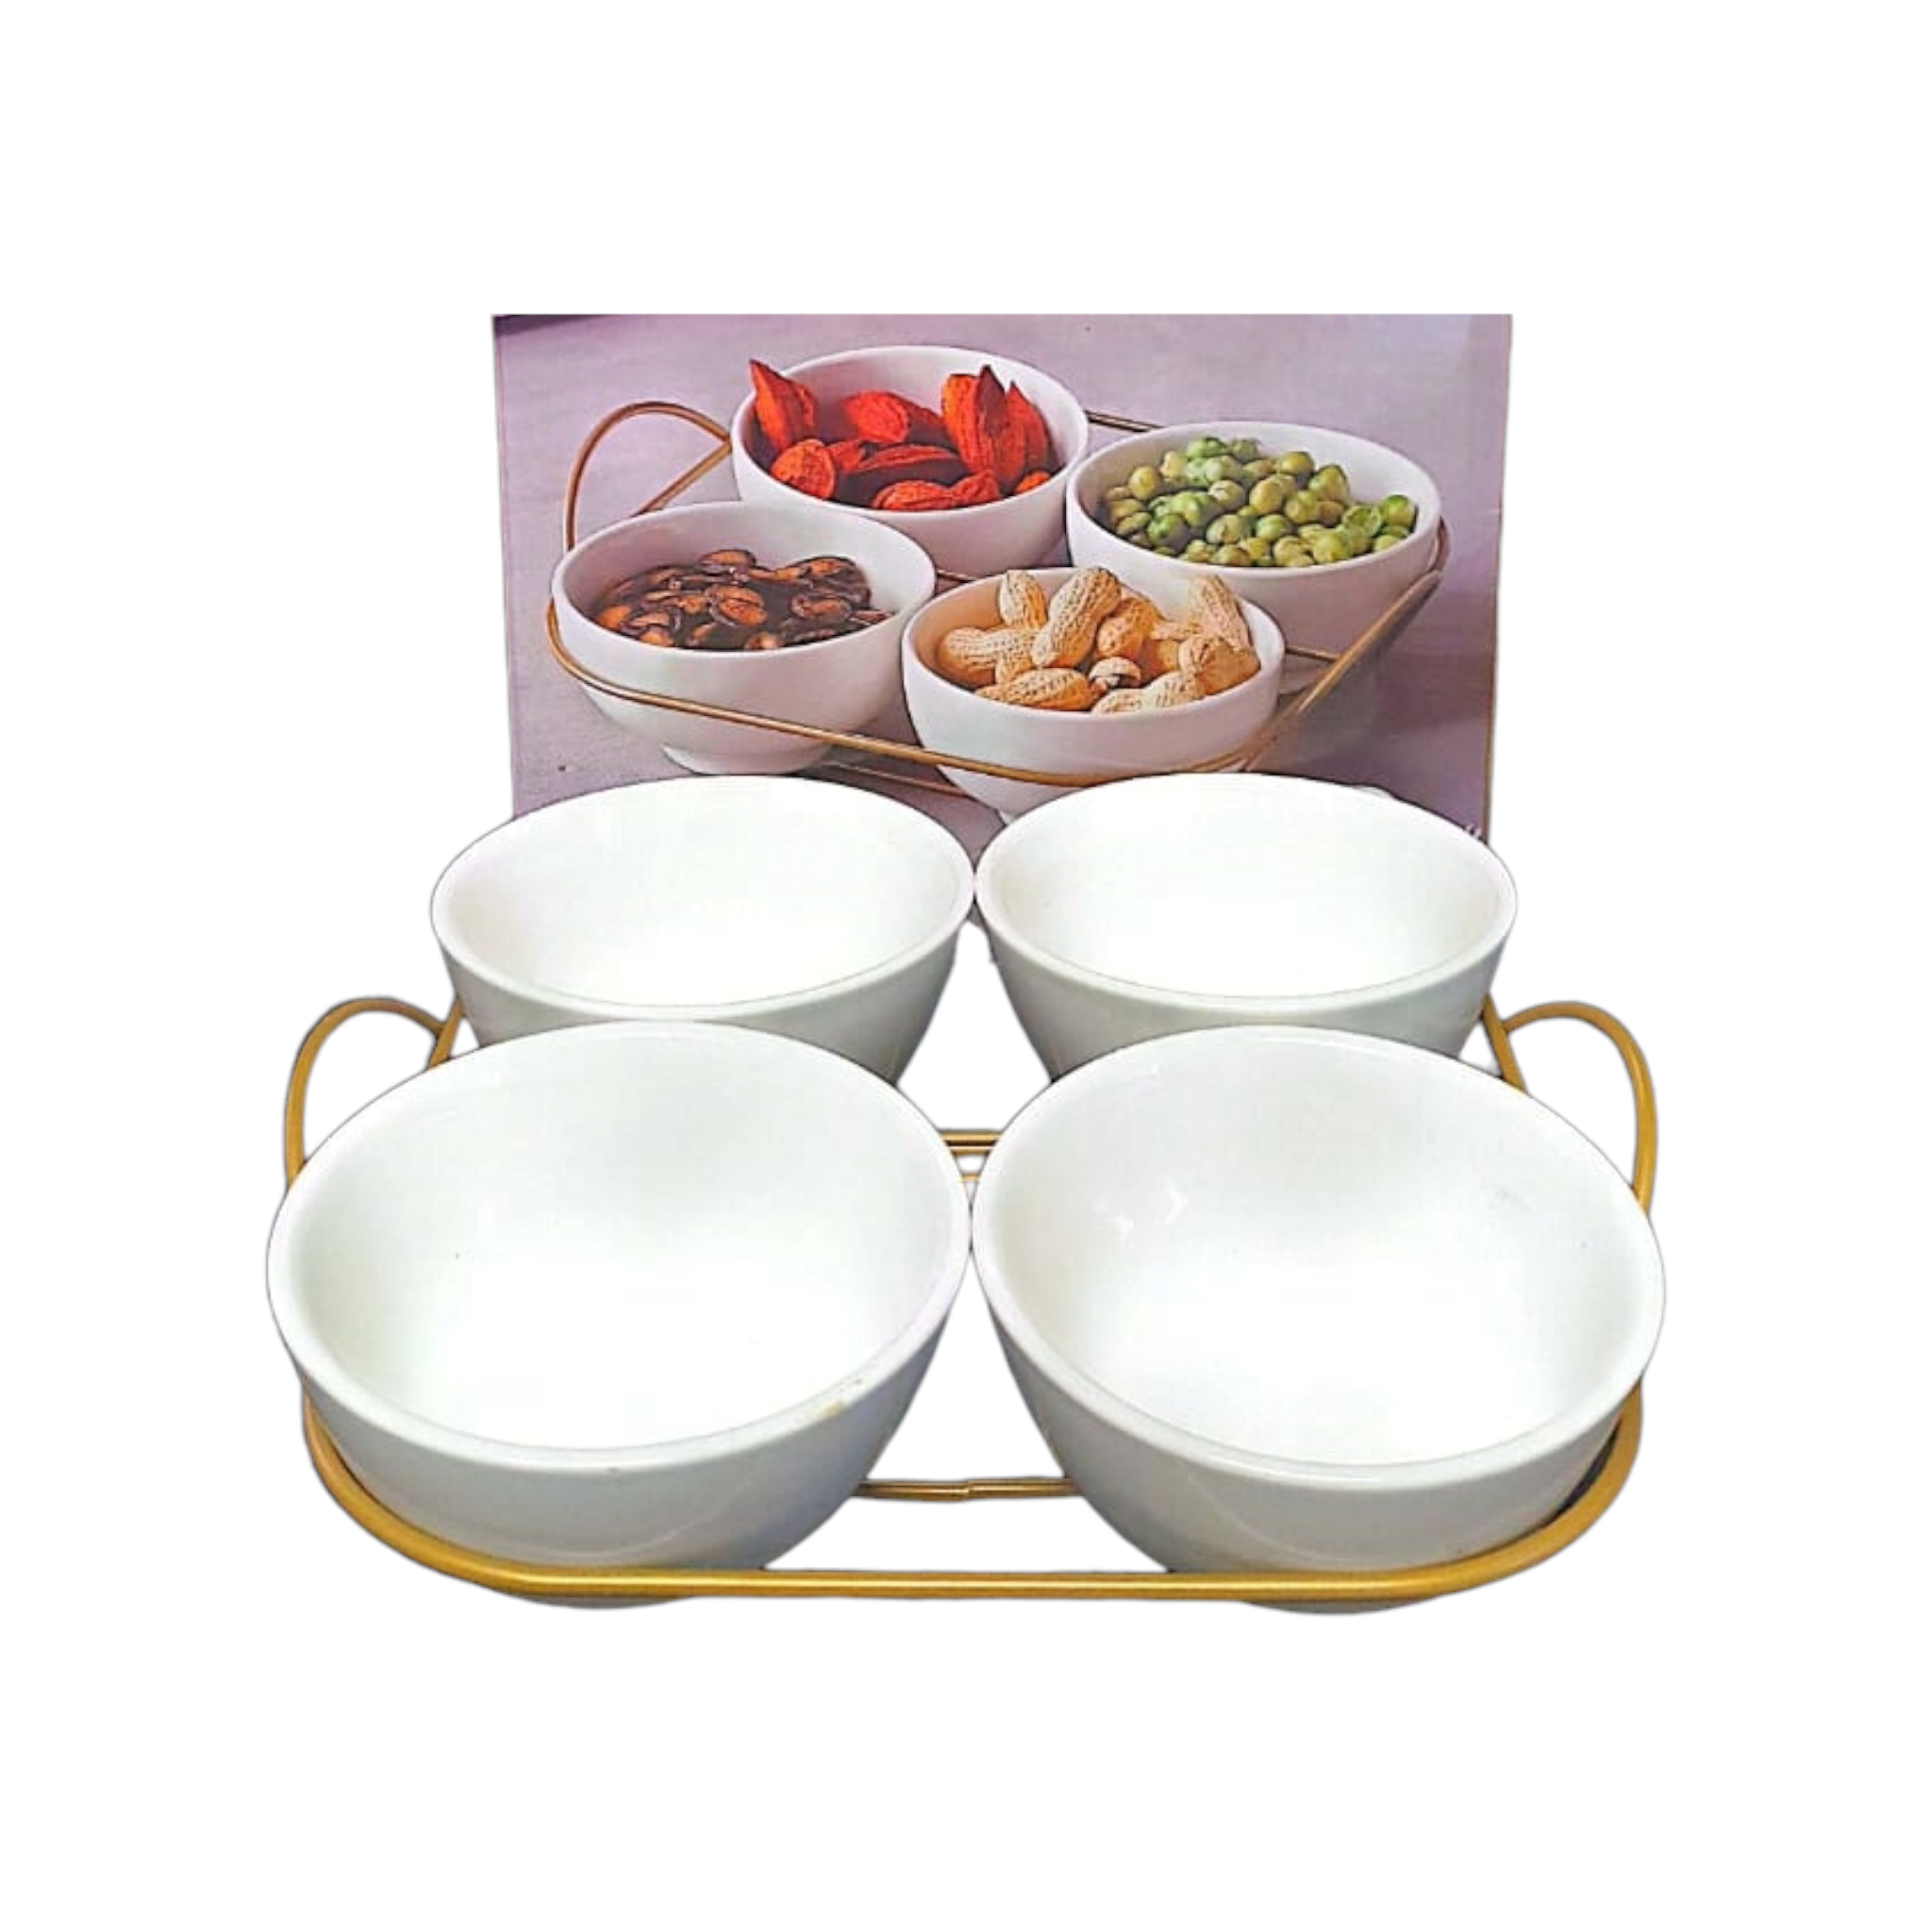 Ceramic White Round Bowl 4pc with Stand 3.5Inch INMIX-11699